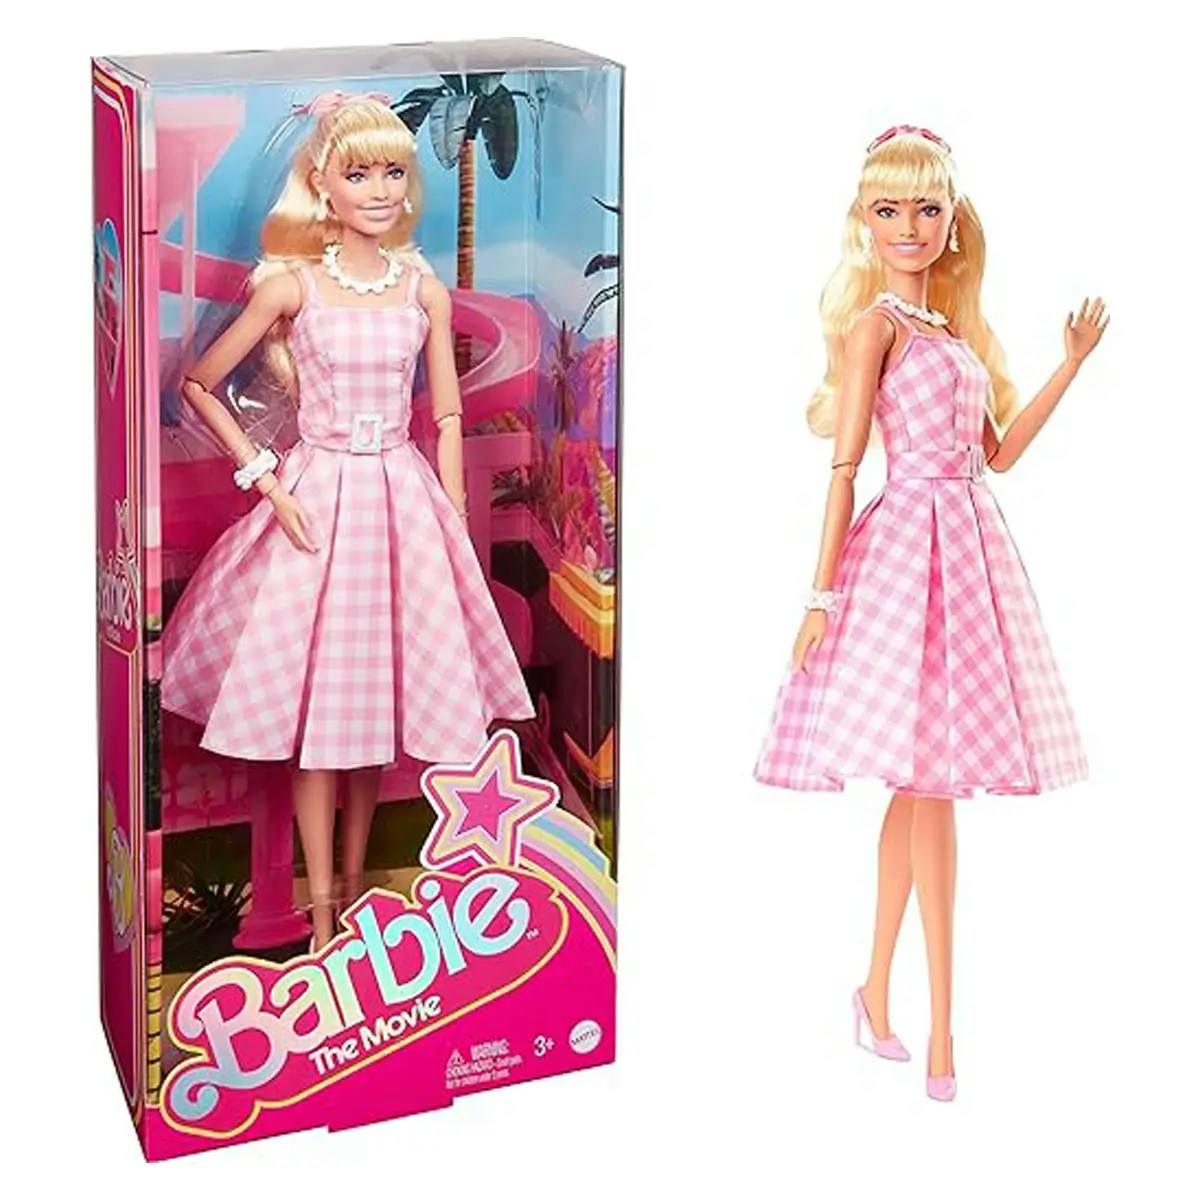 Barbie The Movie Doll: Margot Robbie as Barbie, Collectible doll wearing pink and white gingham dress with daisy chain necklace.